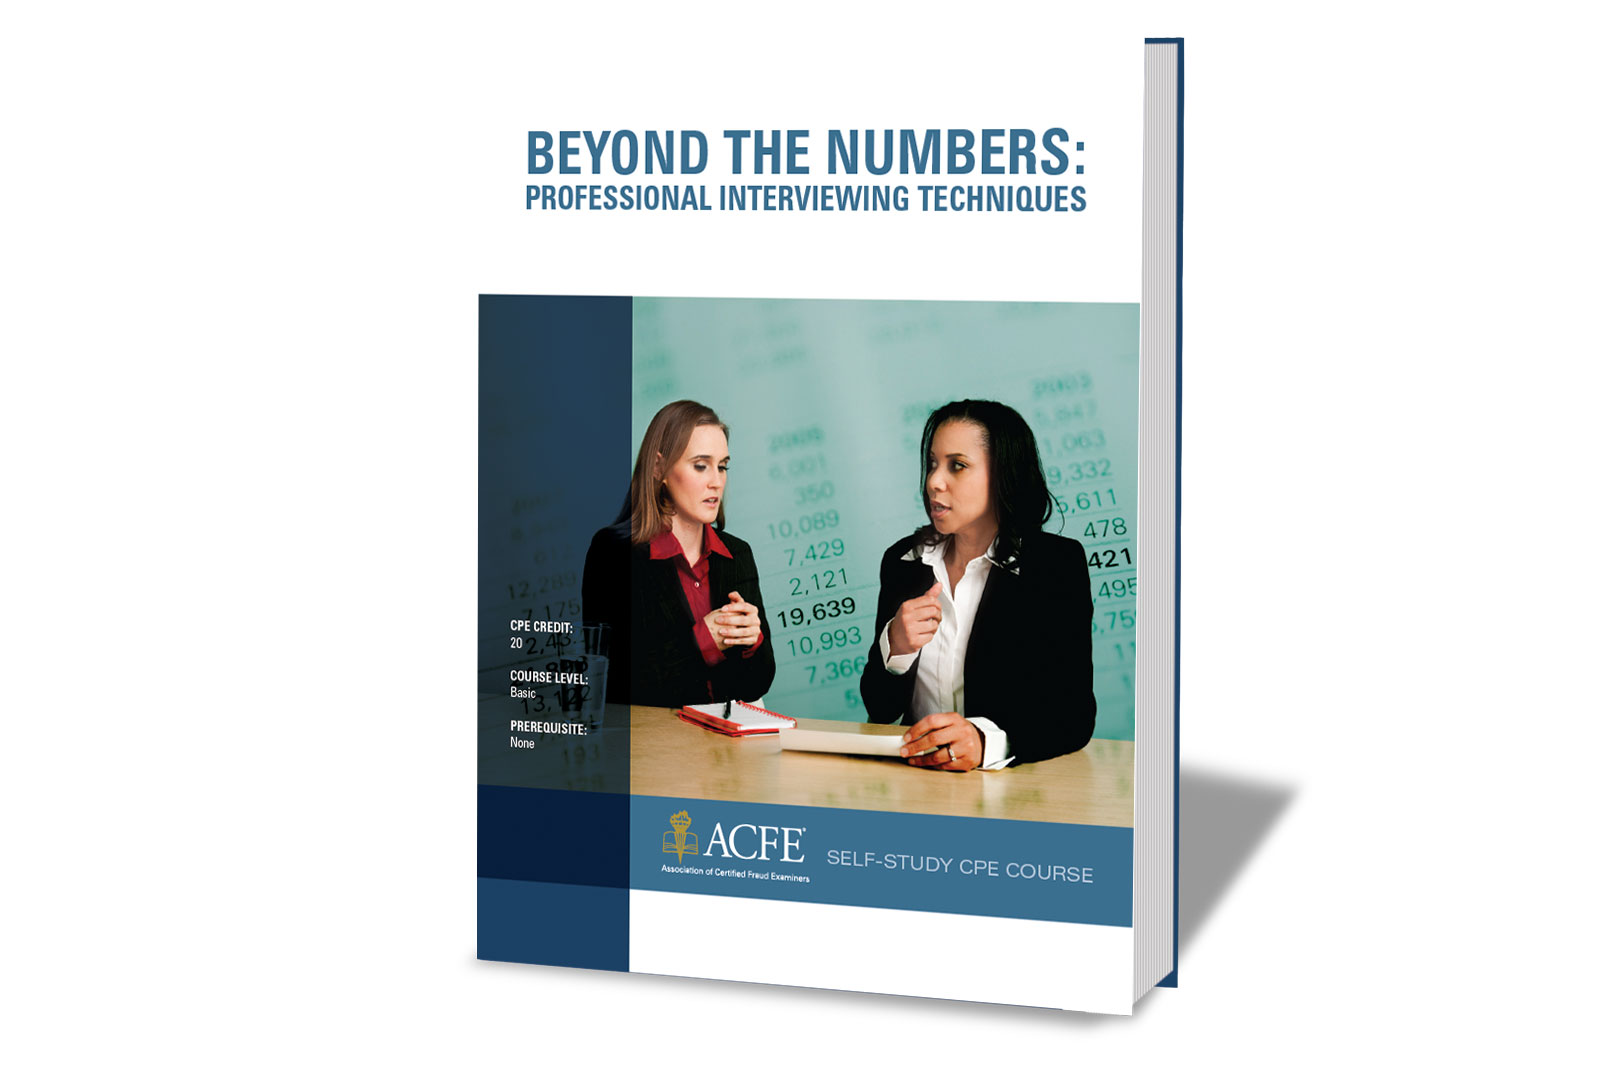 Image of the book cover of Beyond The Numbers.